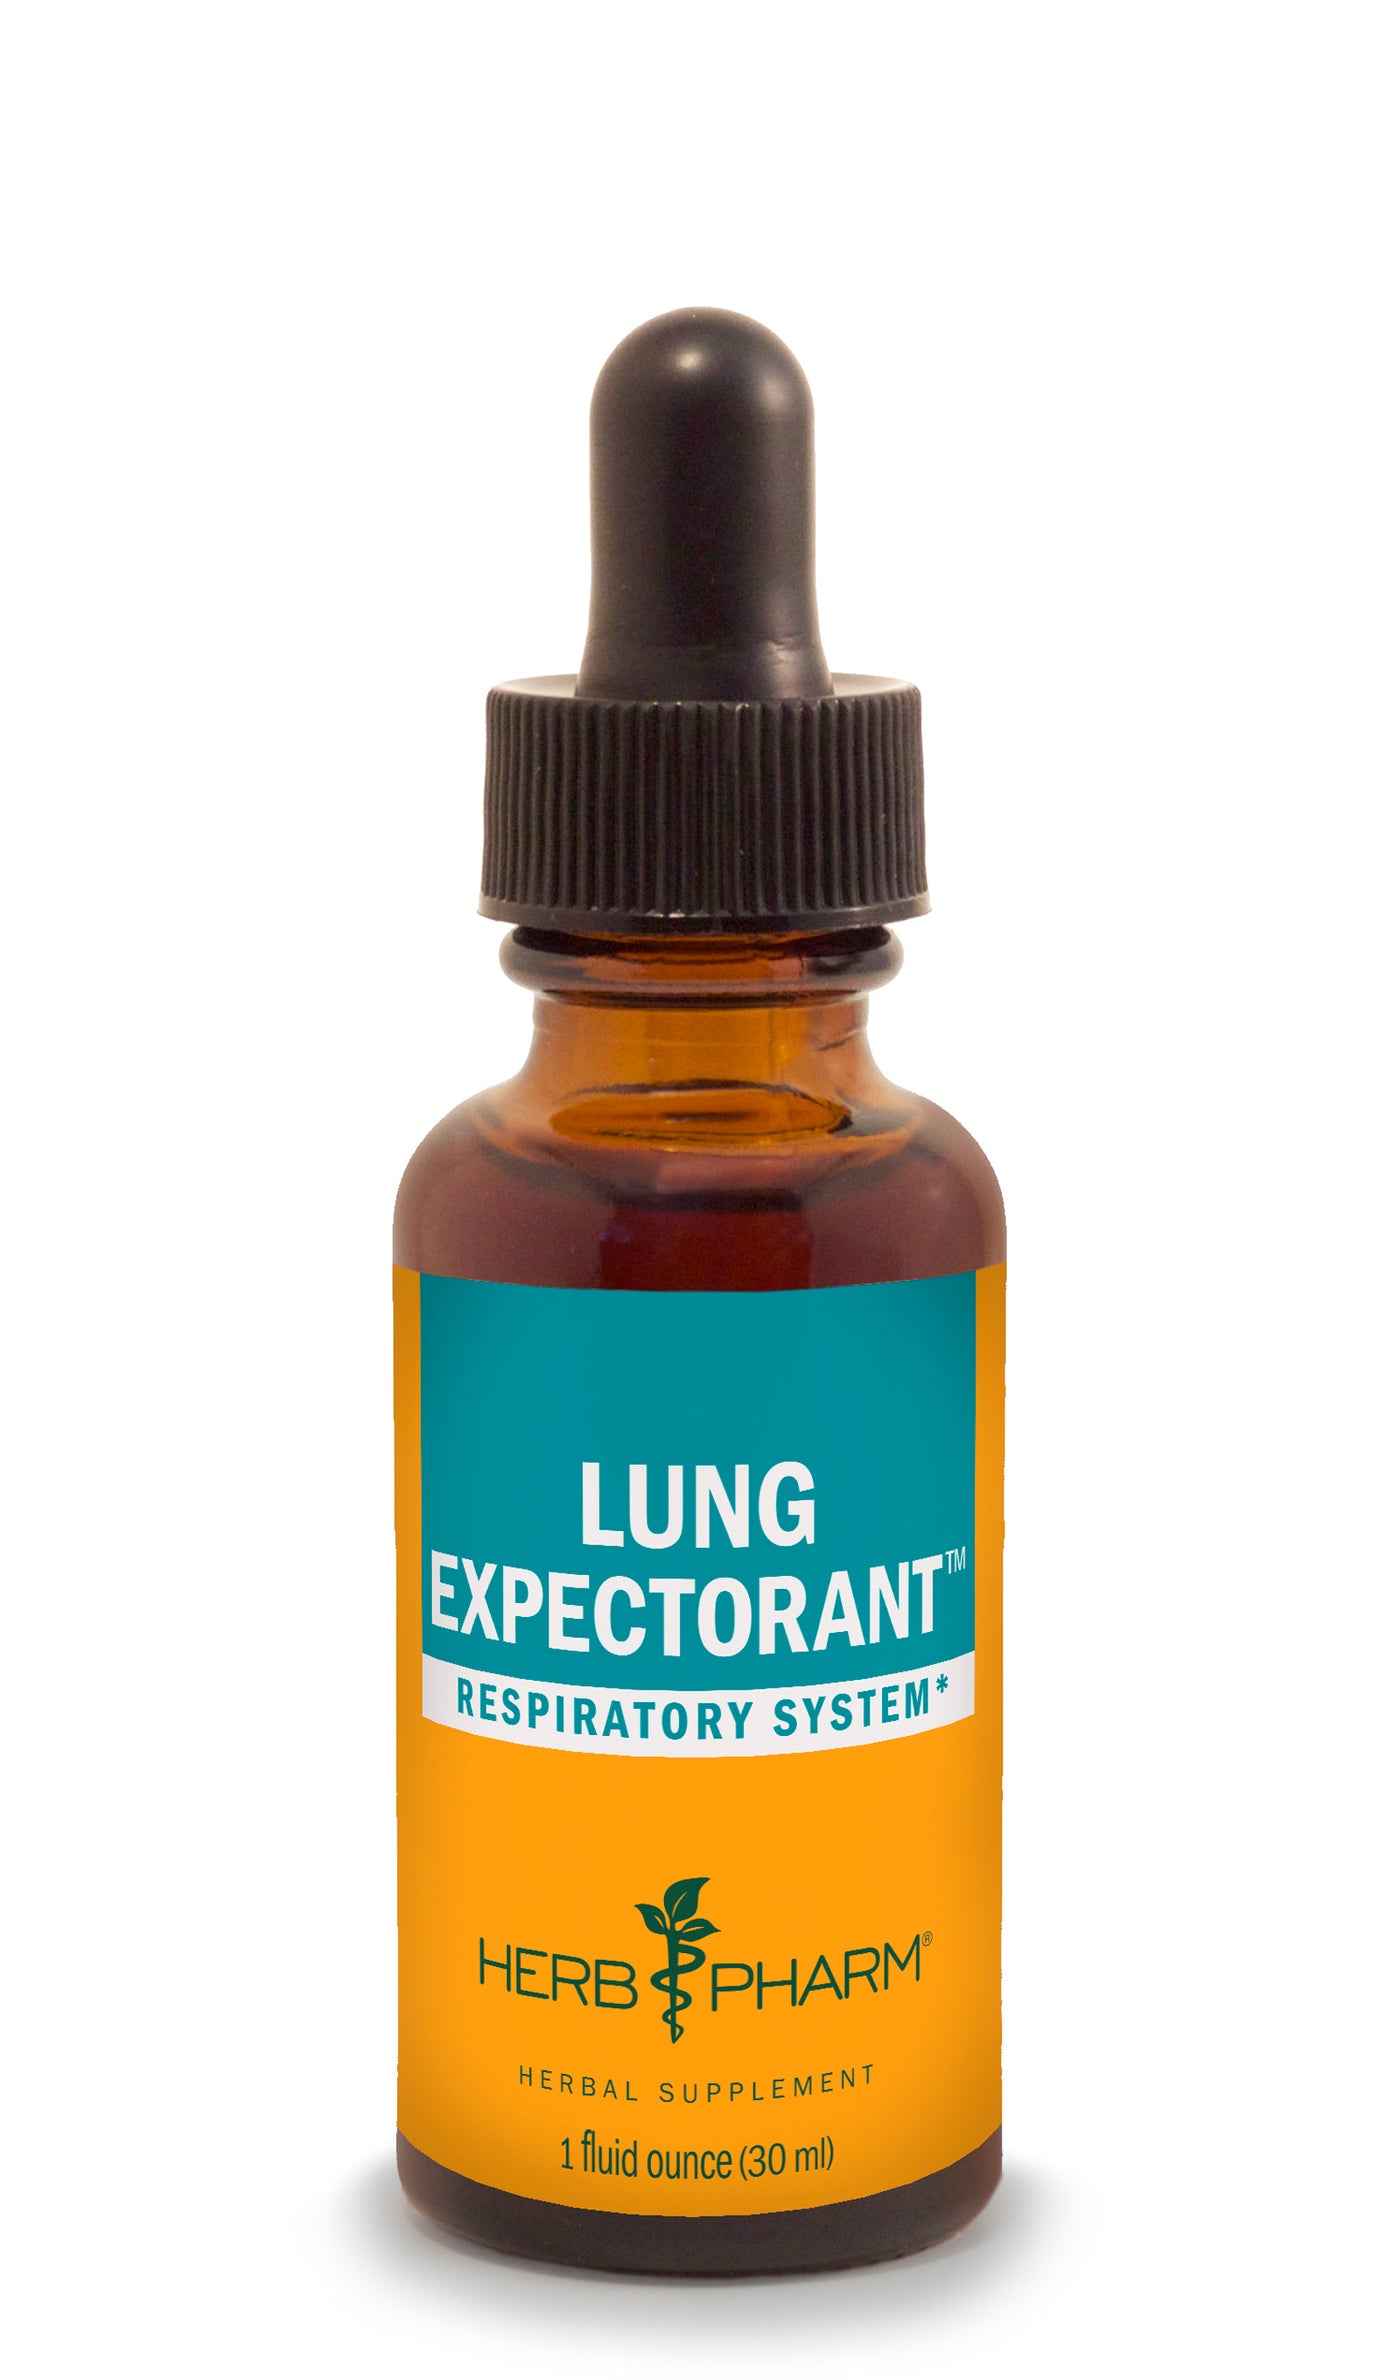 Lung Expectorant Extract